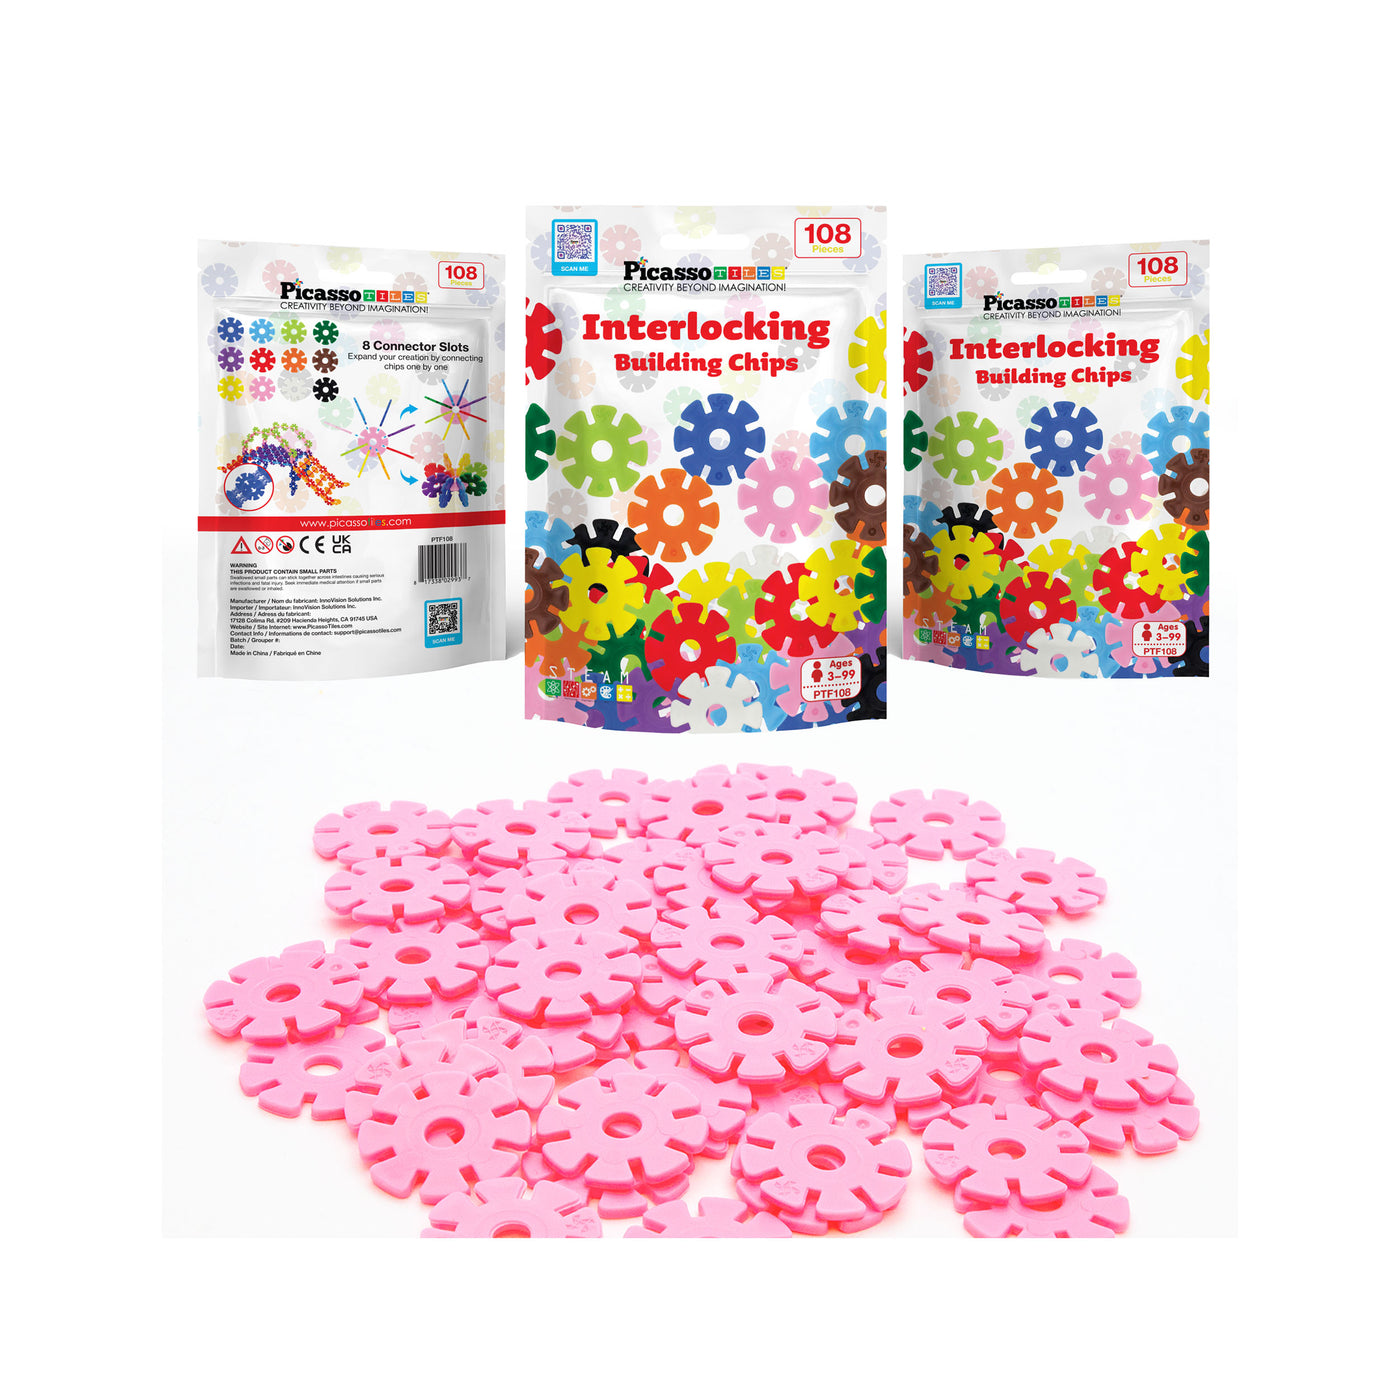 PicassoTiles Building Chip Interlocking Disc Construction Blocks in Color Pink